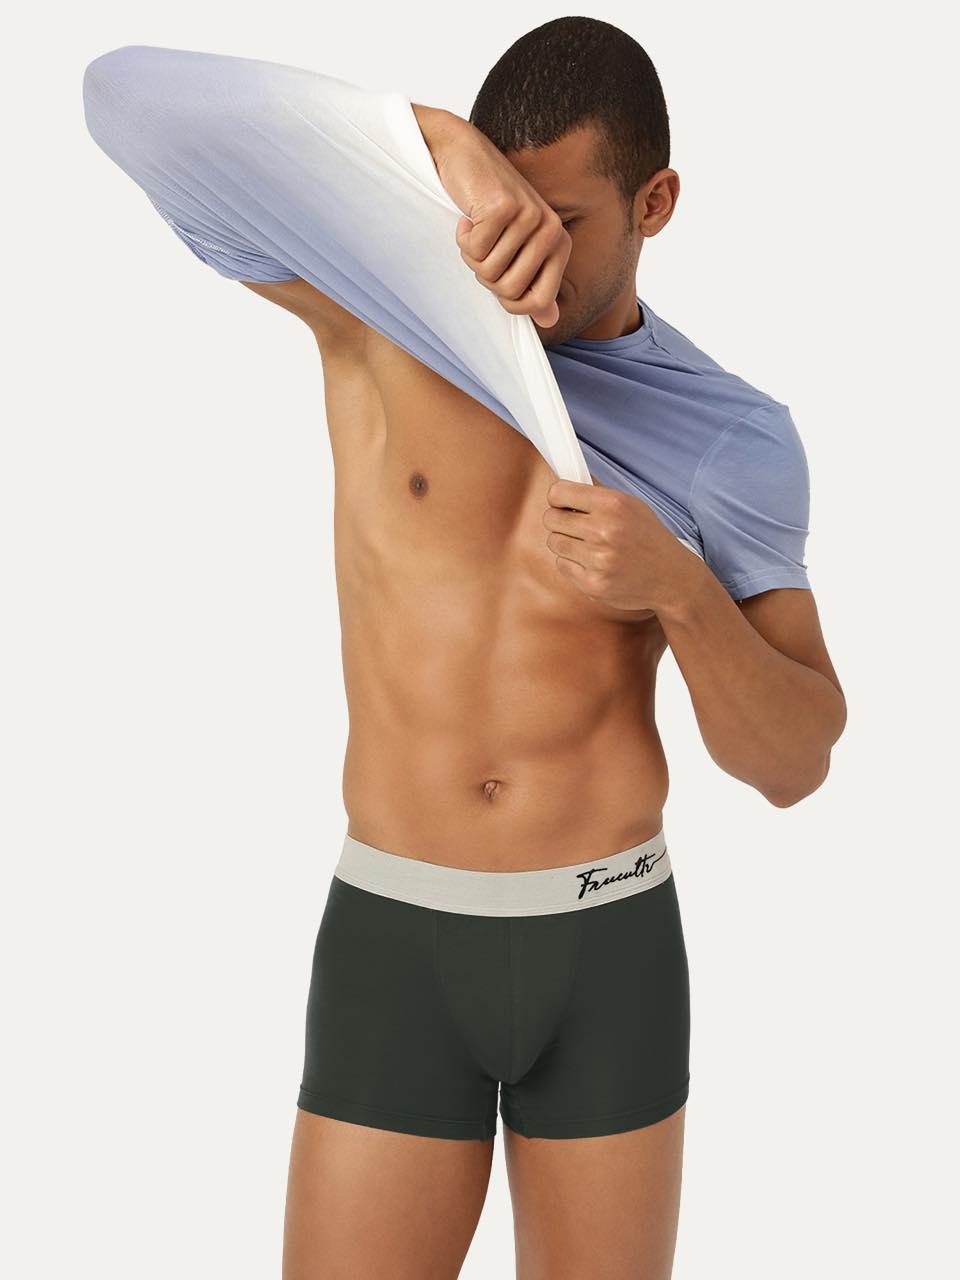 Men's Anti-Bacterial Micro Modal Trunk in Cult Waistband (Pack of 1)